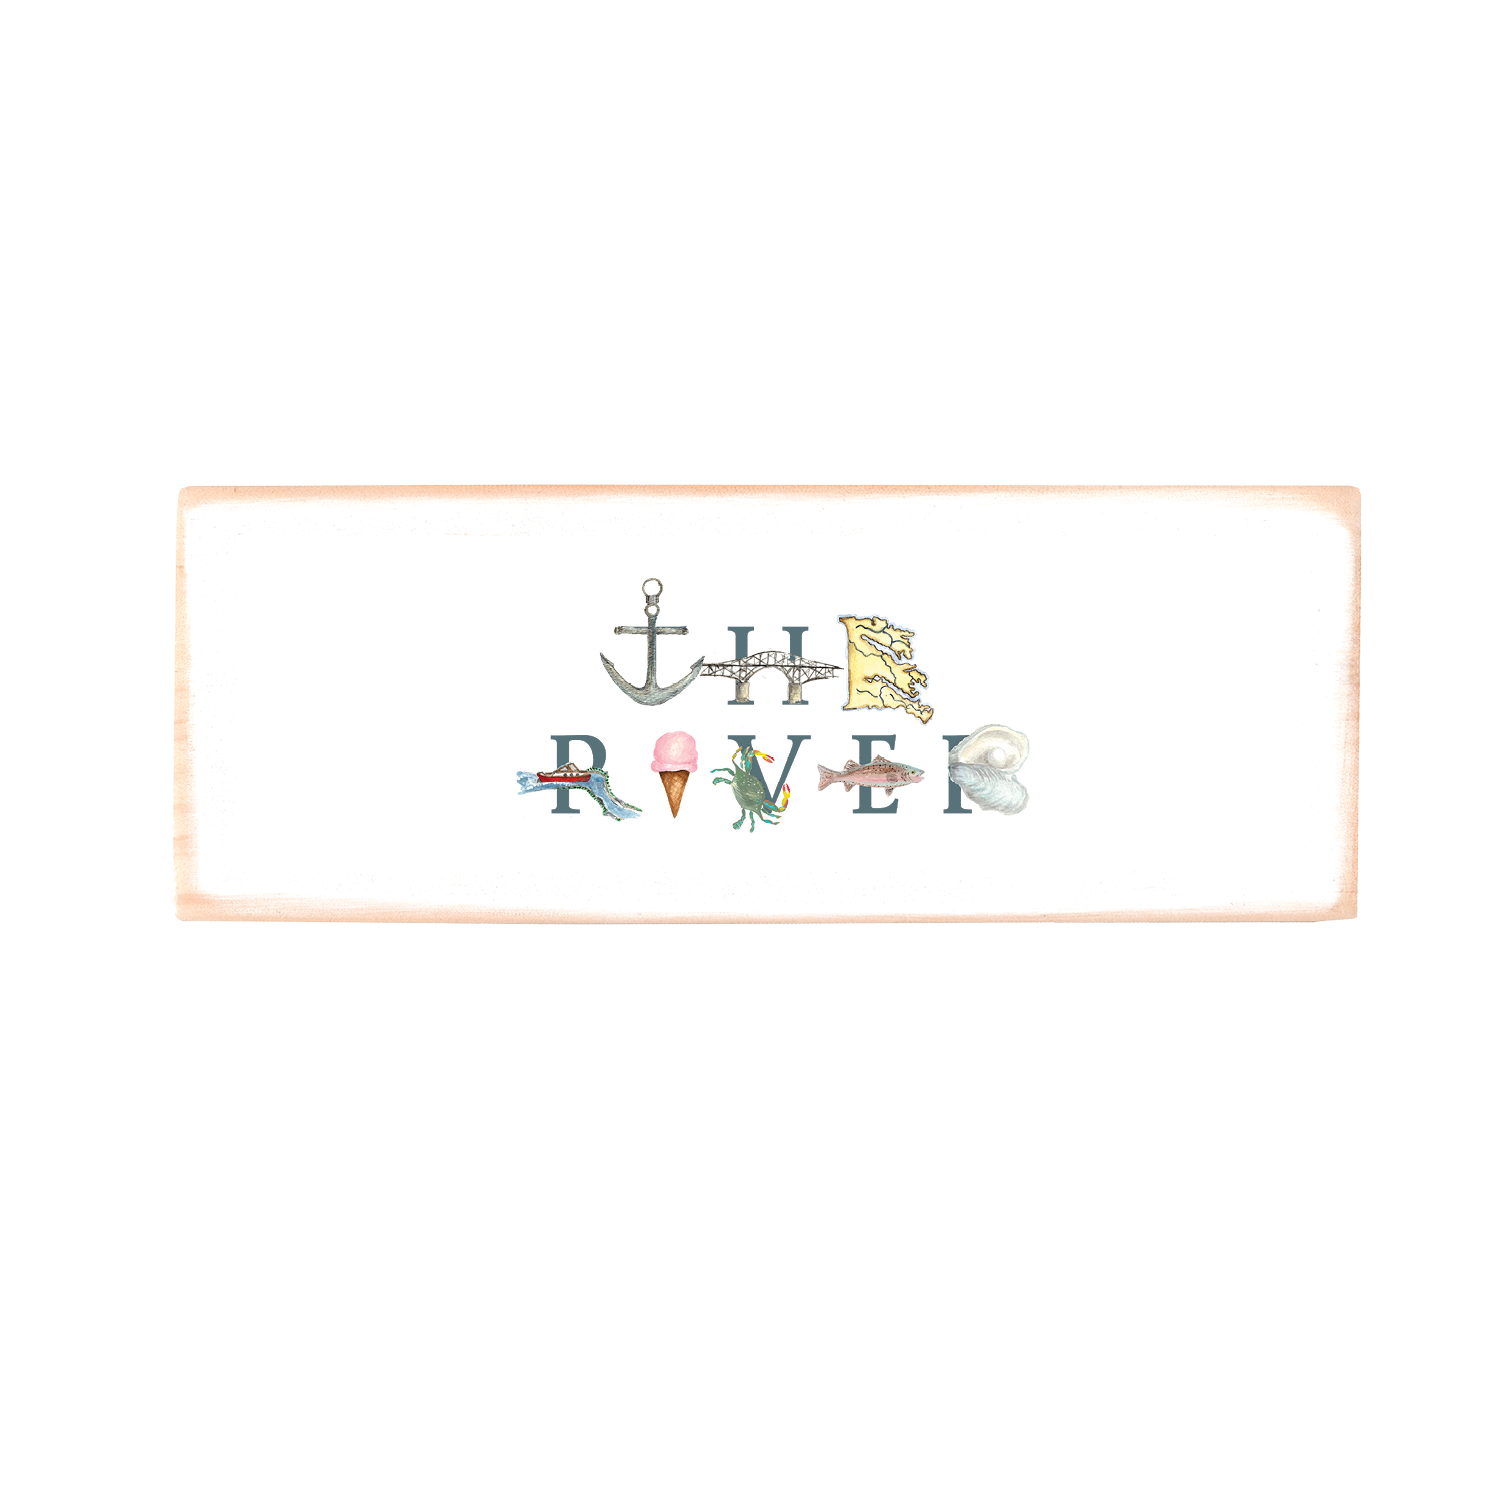 The River rectangle wood block